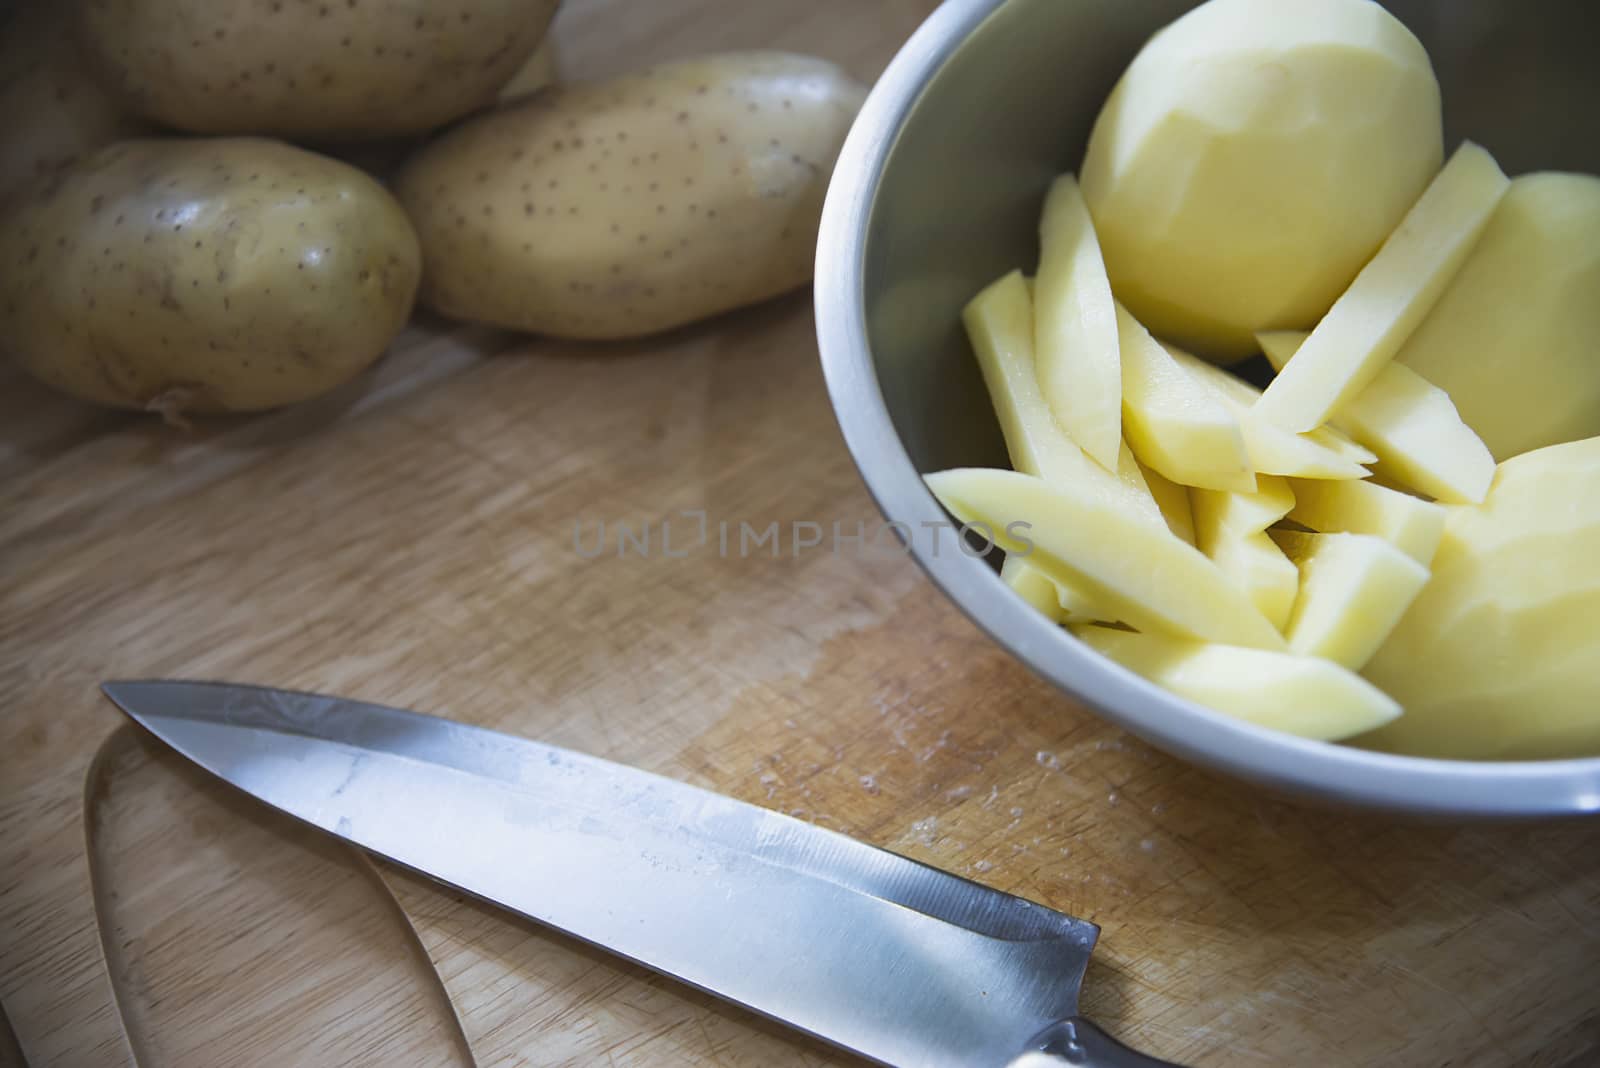 Fresh raw potato stick prepared for cooking in the kitchen - potato cooking concept by pairhandmade